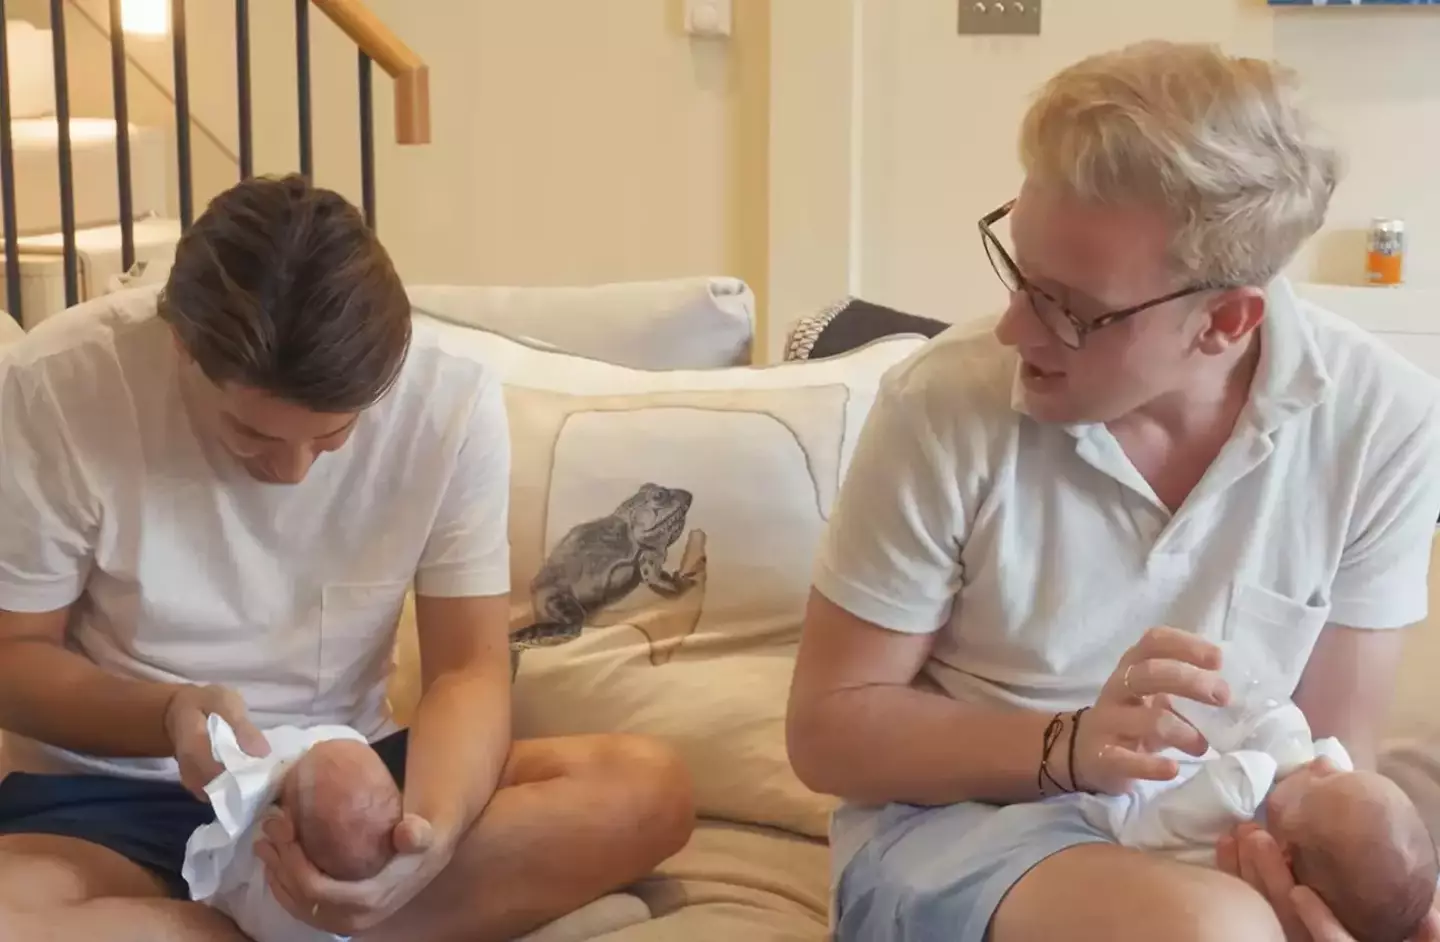 Ollie Locke and his husband Gareth are now dads!